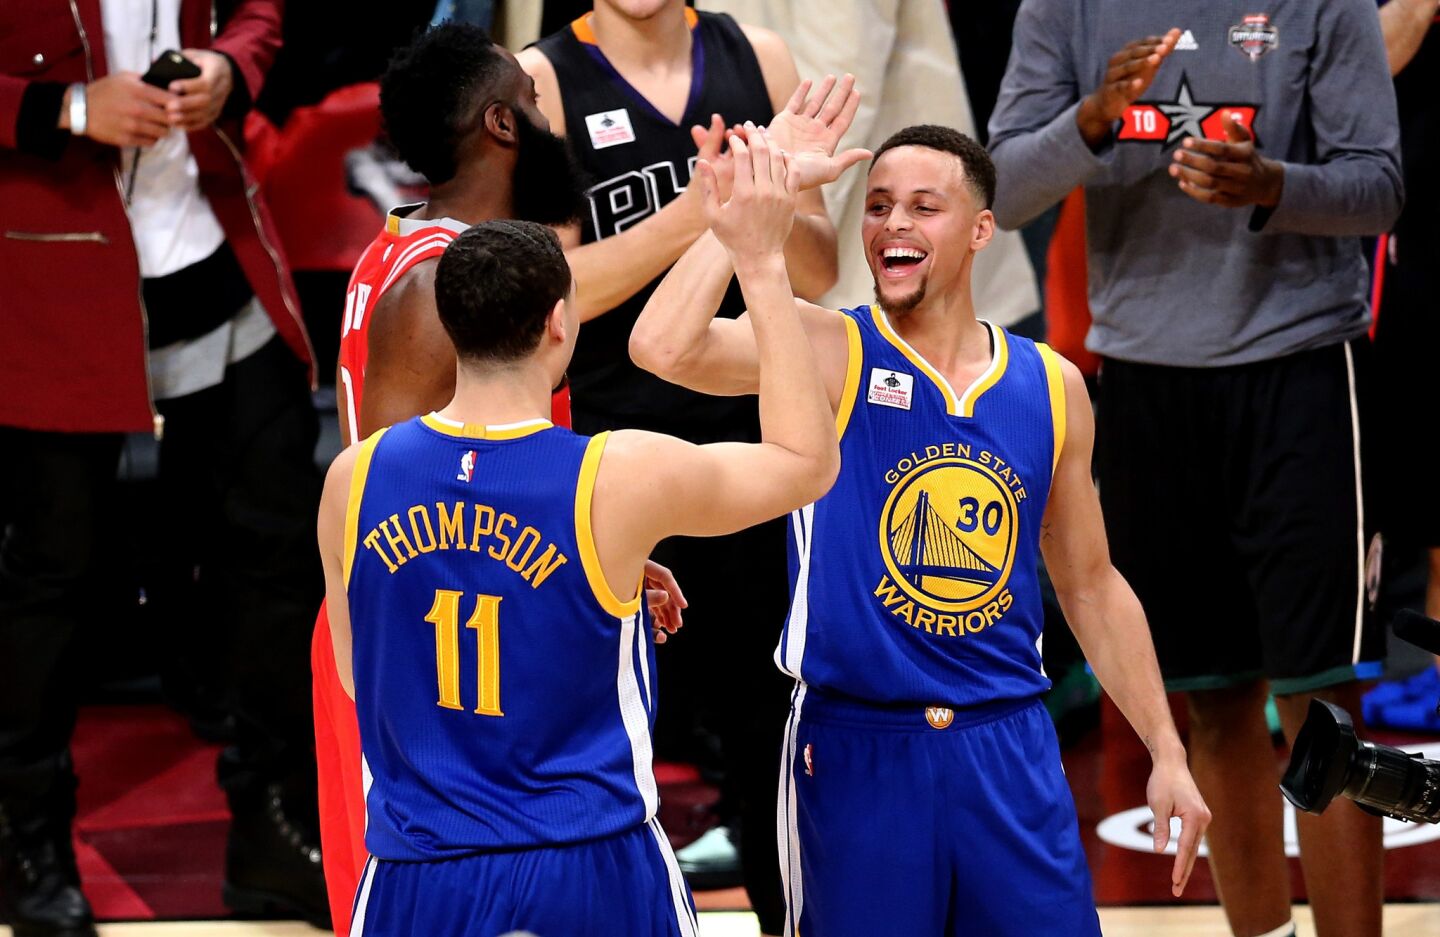 Golden State guard Klay Thompson is congratulated by teammate Stephen Curry after winning the Three-Point Contest on Saturday.